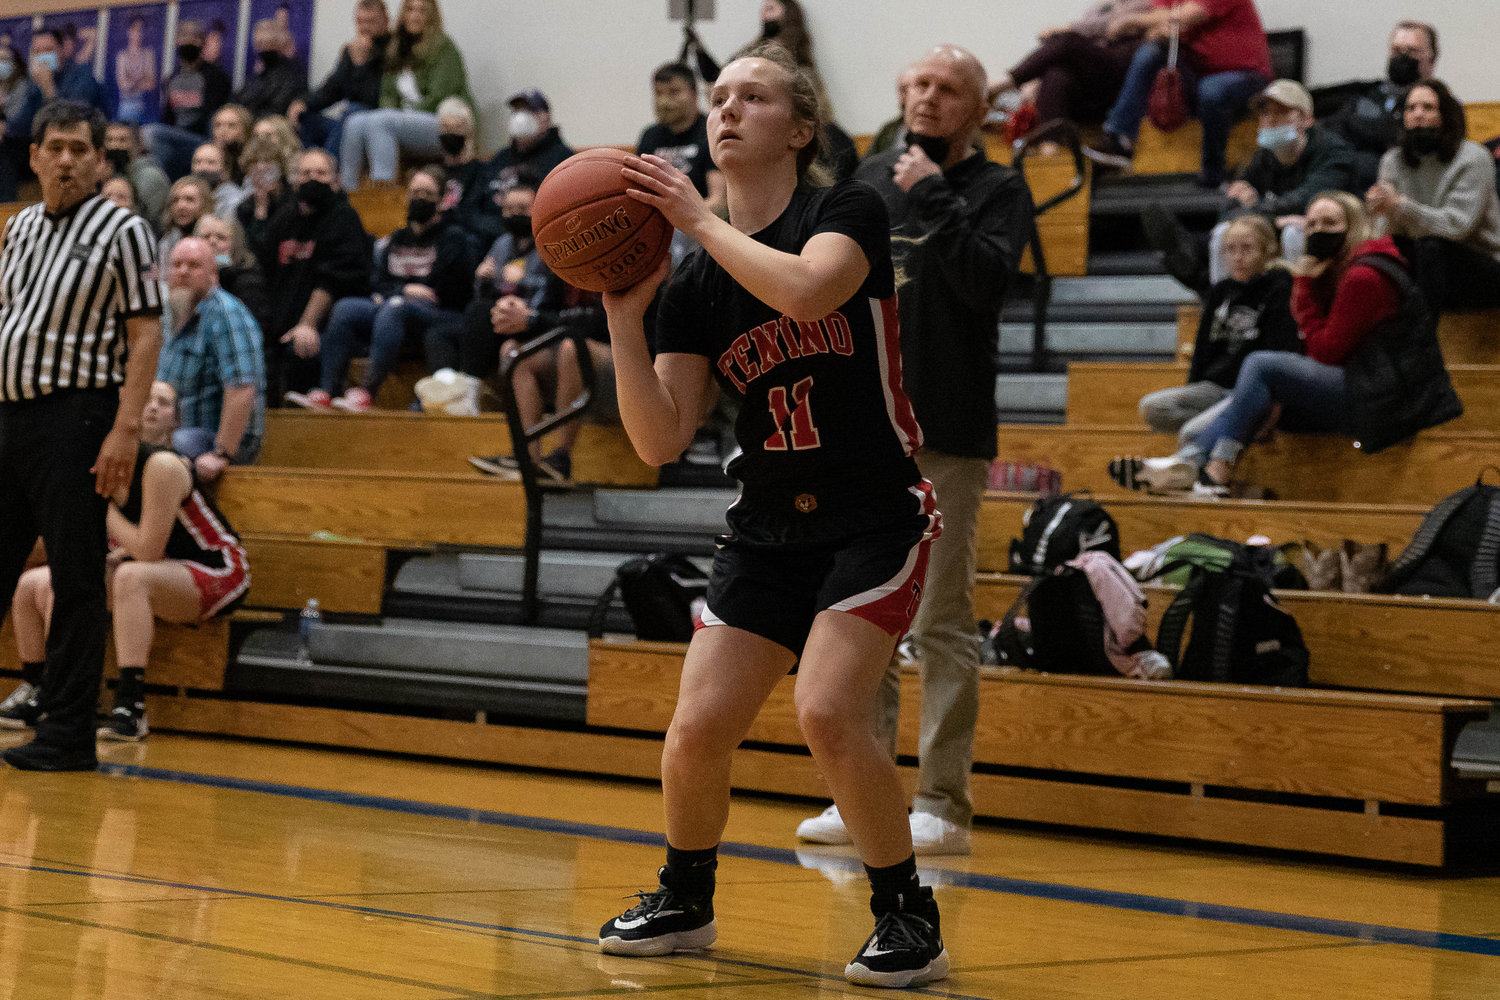 Tenino guard Megan Letts takes a shot against La Center in the 1A District IV semifinals Feb. 15.